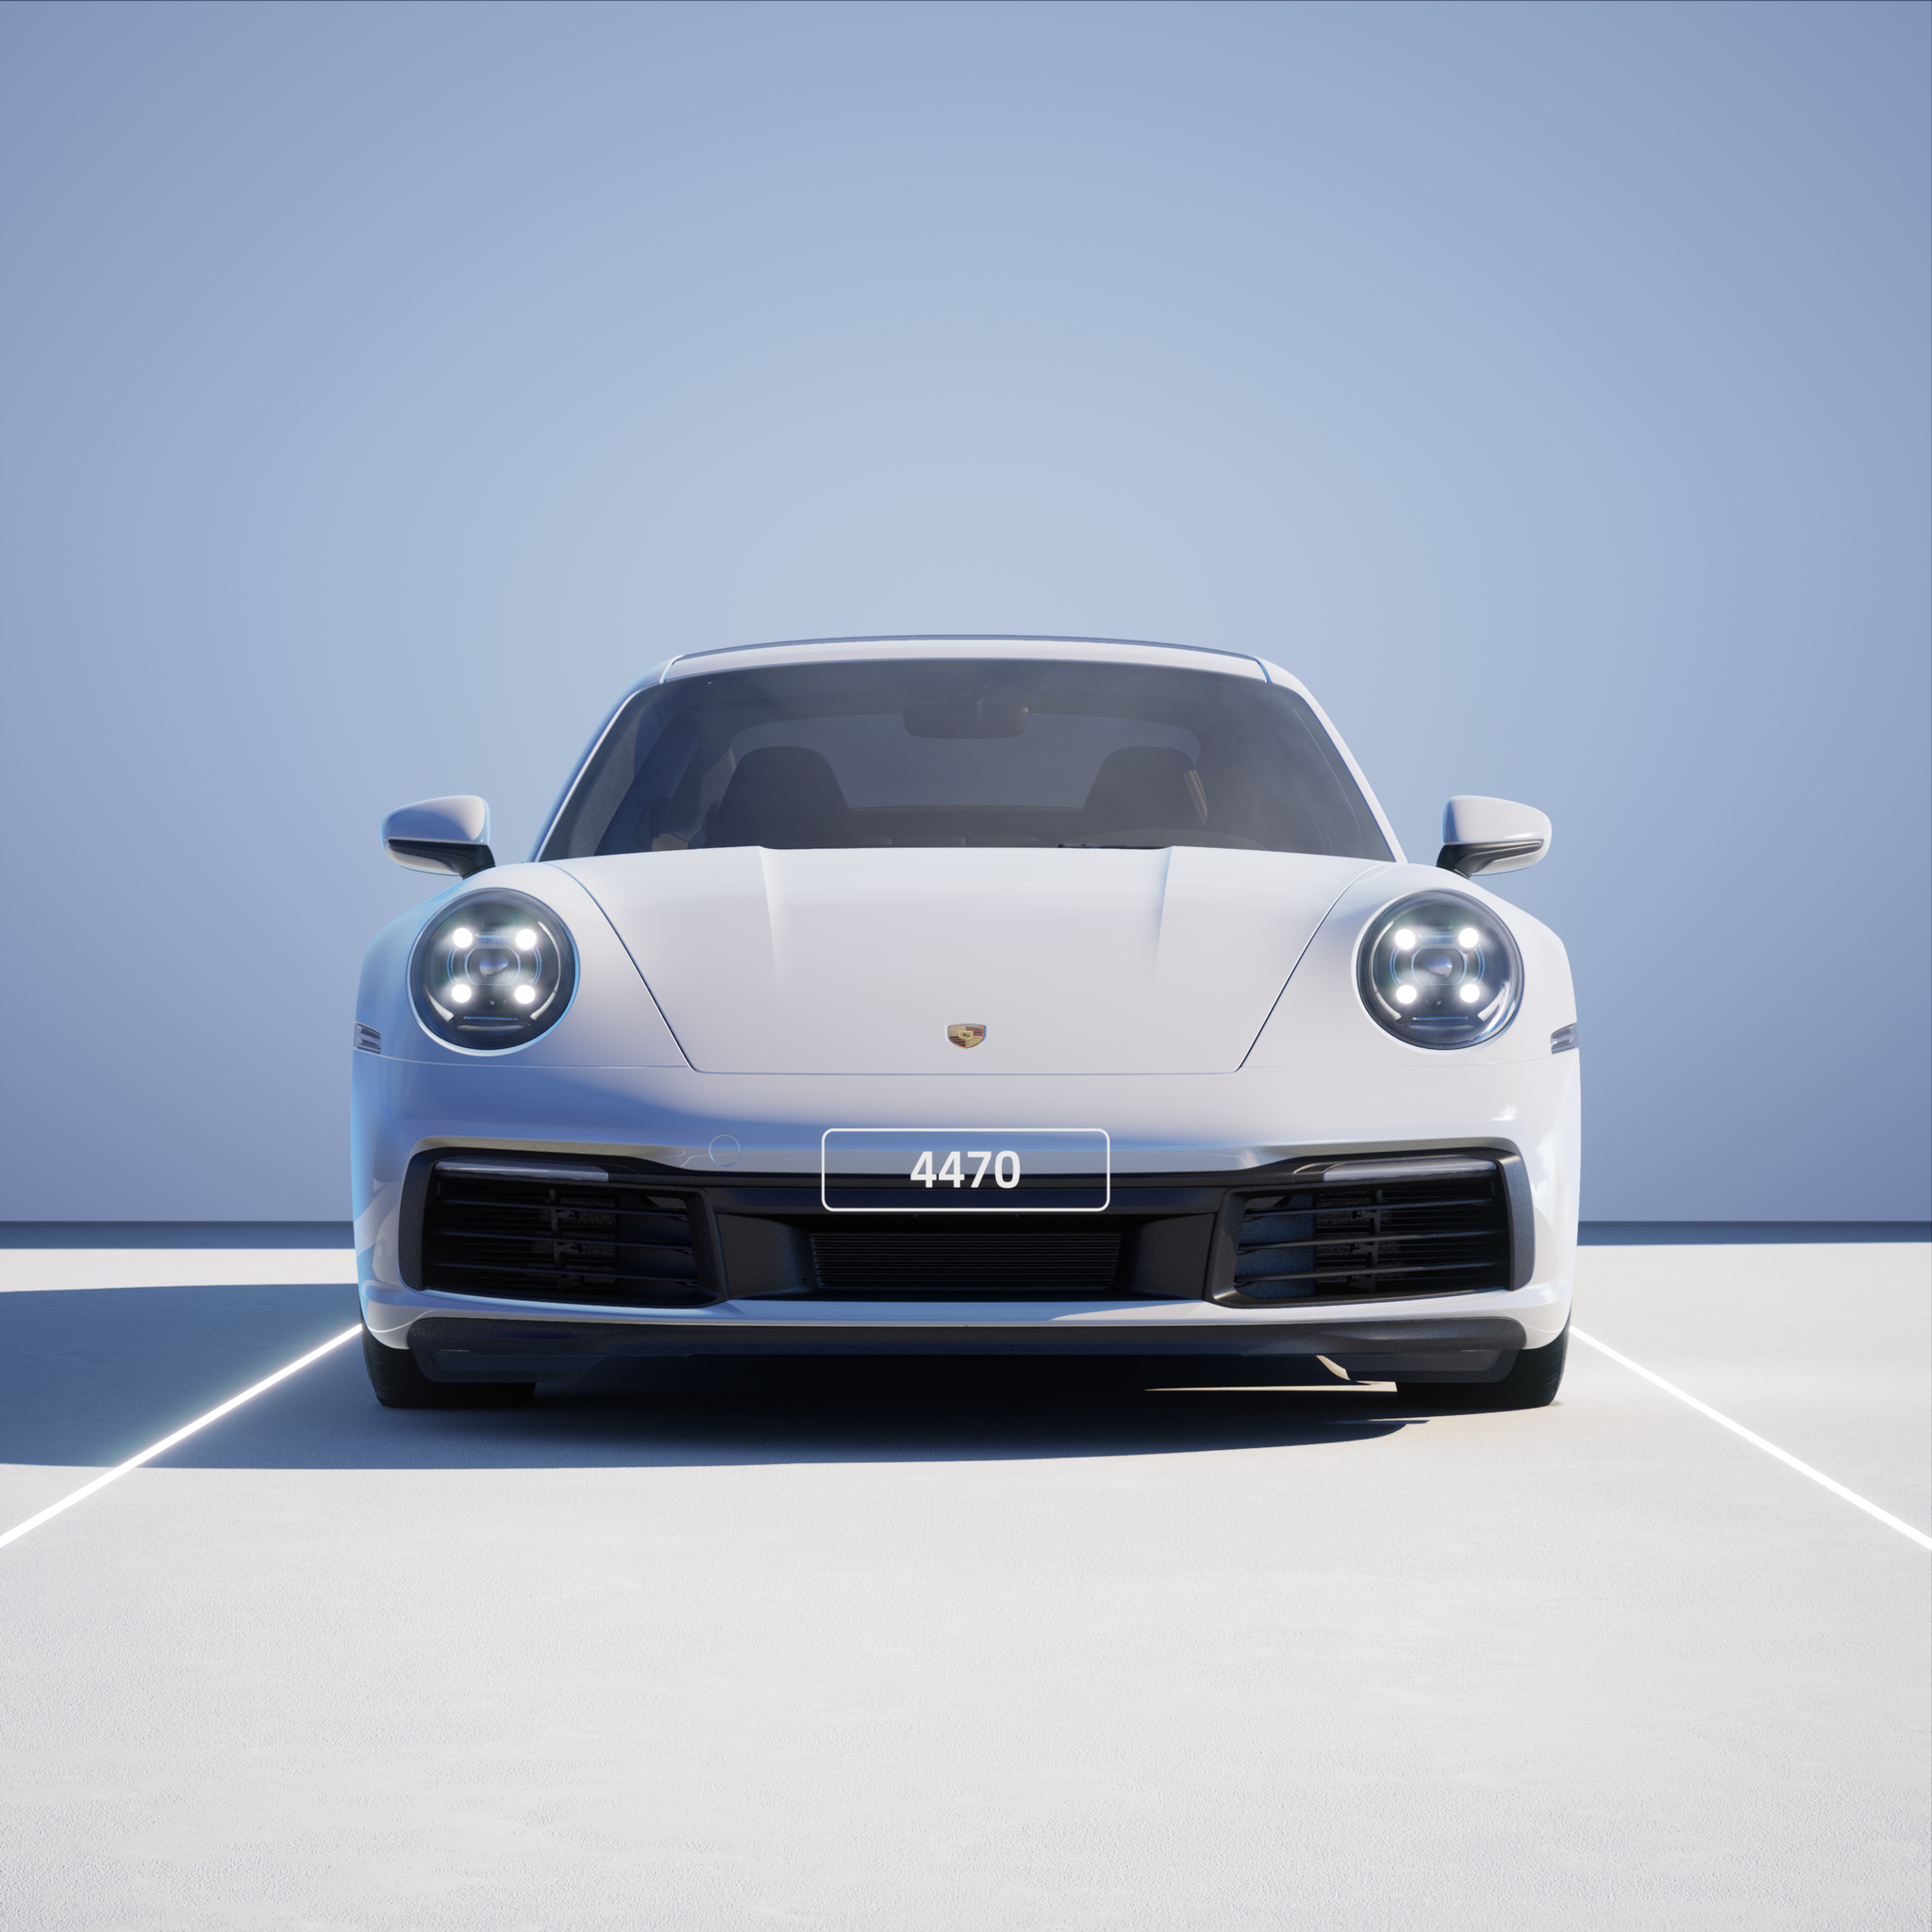 The PORSCHΞ 911 4470 image in phase